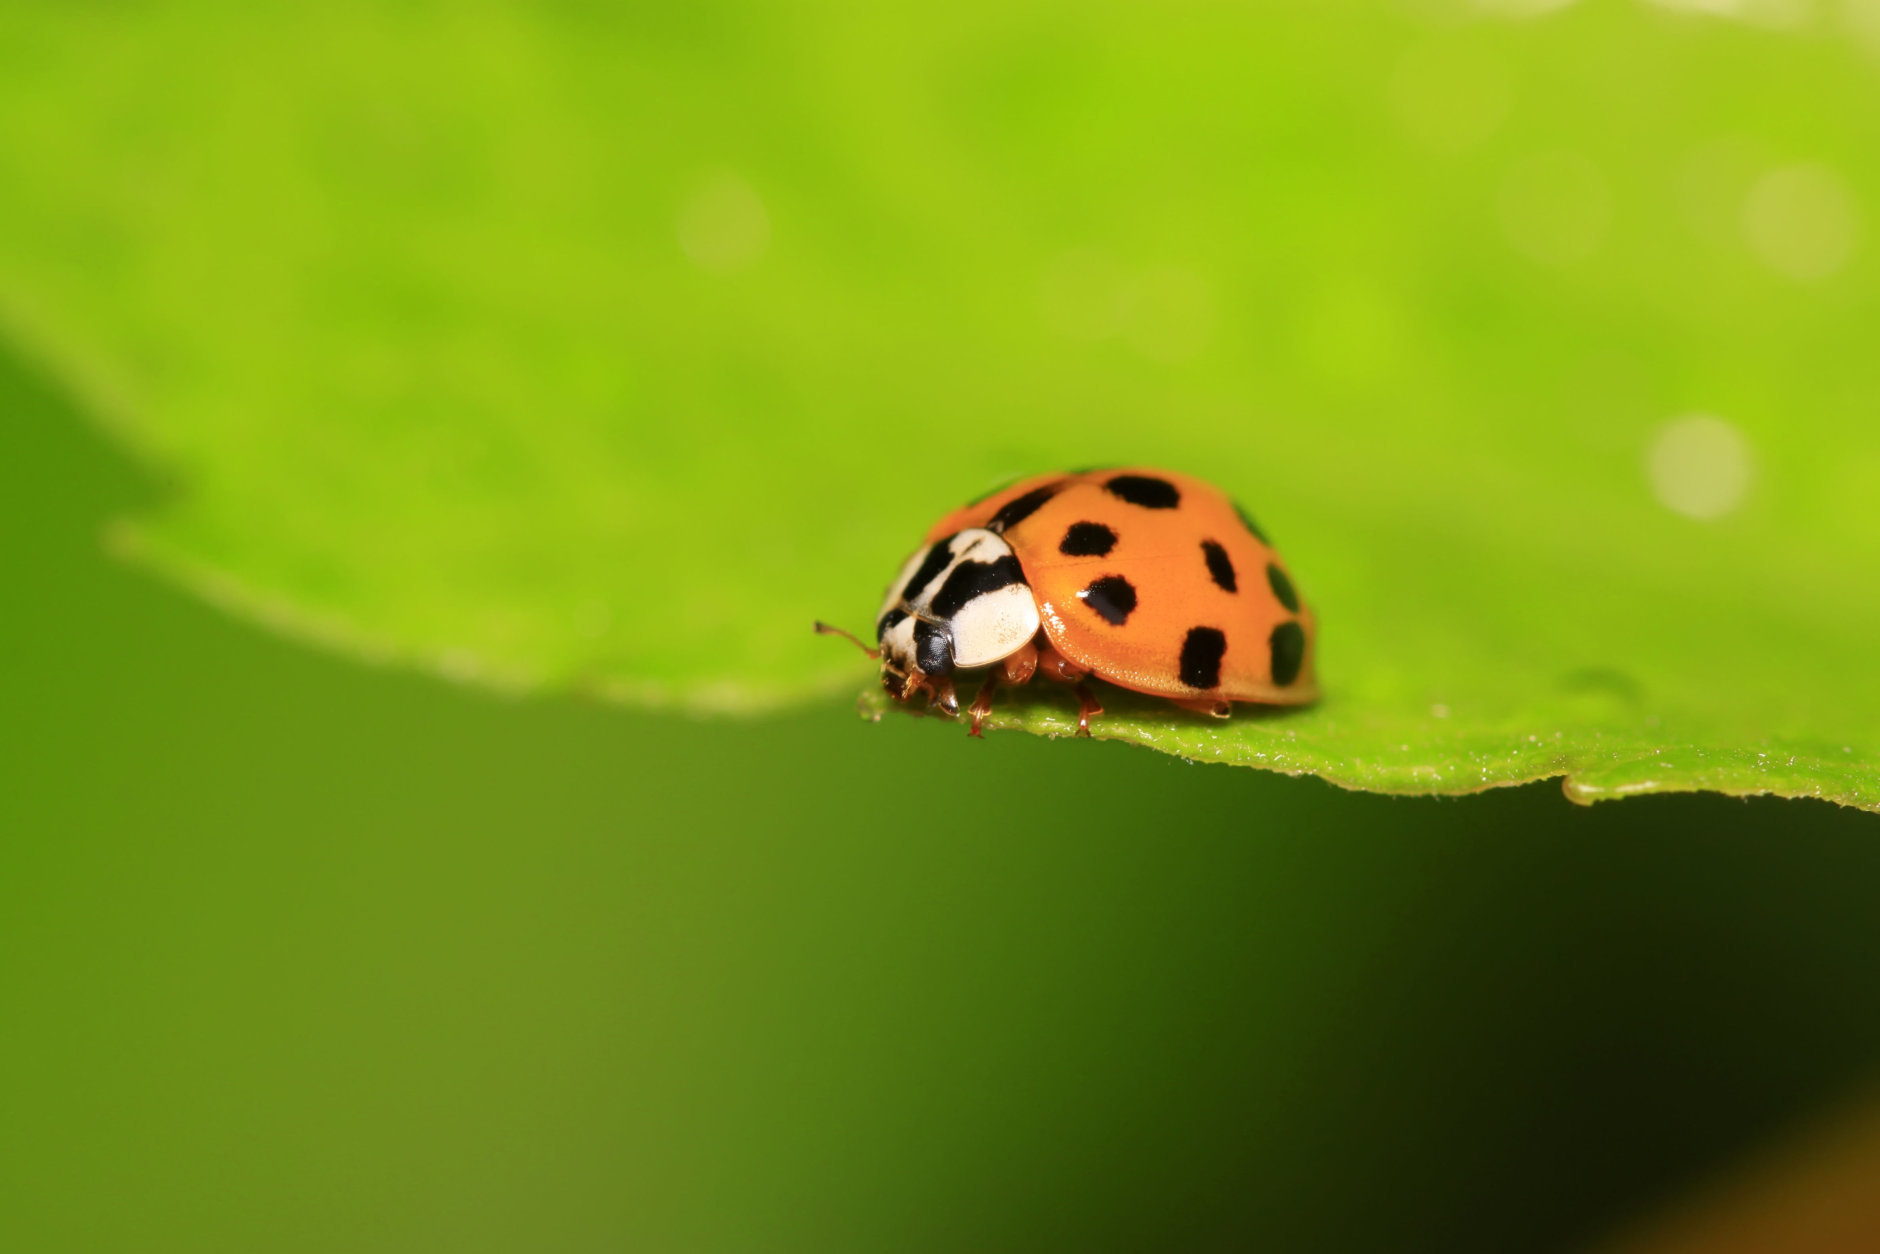 Ladybugs can be released back outdoors. (Thinkstock)